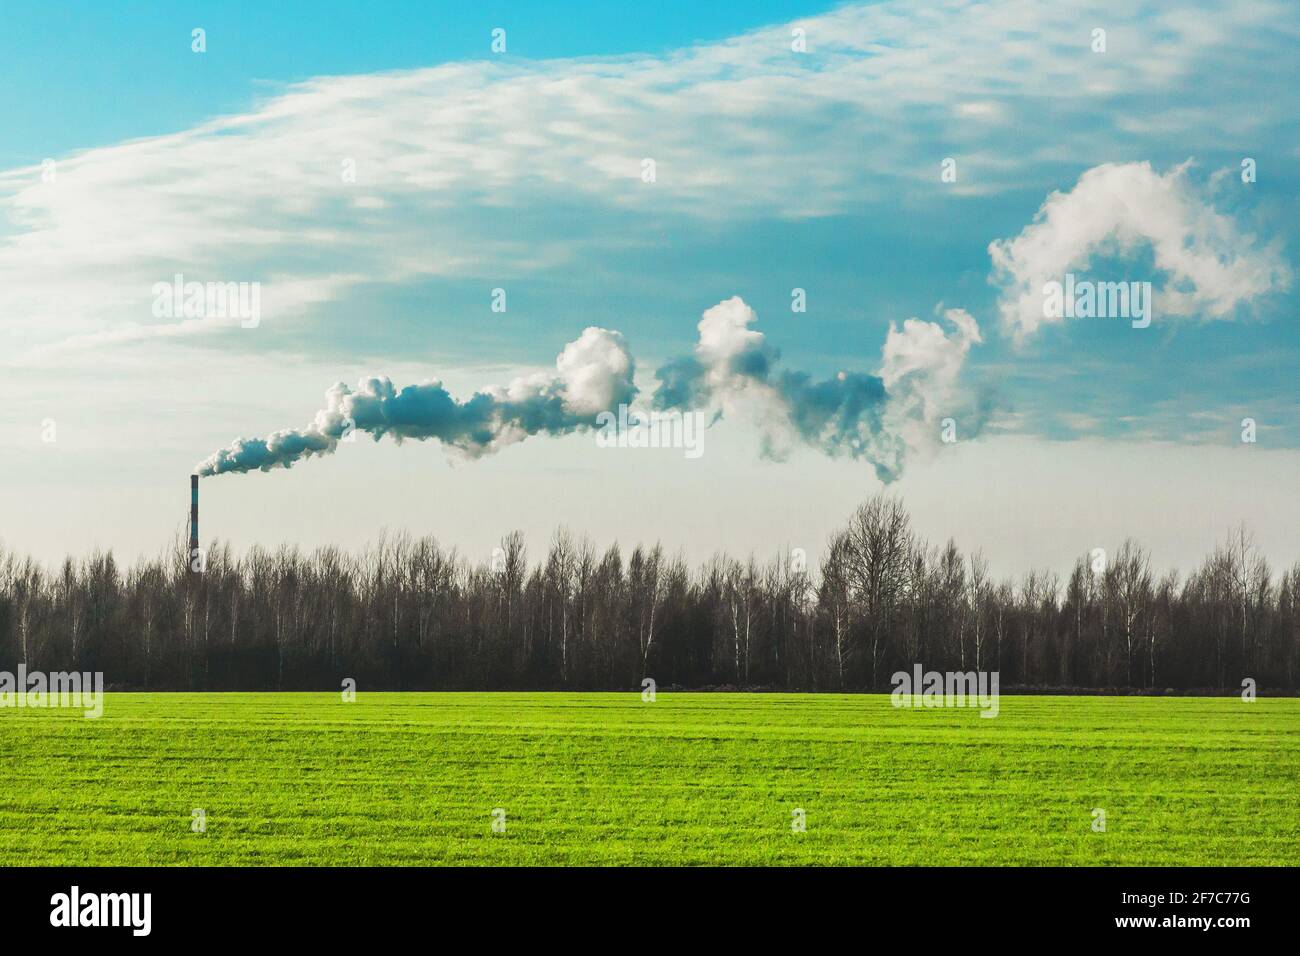 Environmental pollution, environmental problems, smoke from the chimney of an industrial plant or thermal power plant. Stock Photo